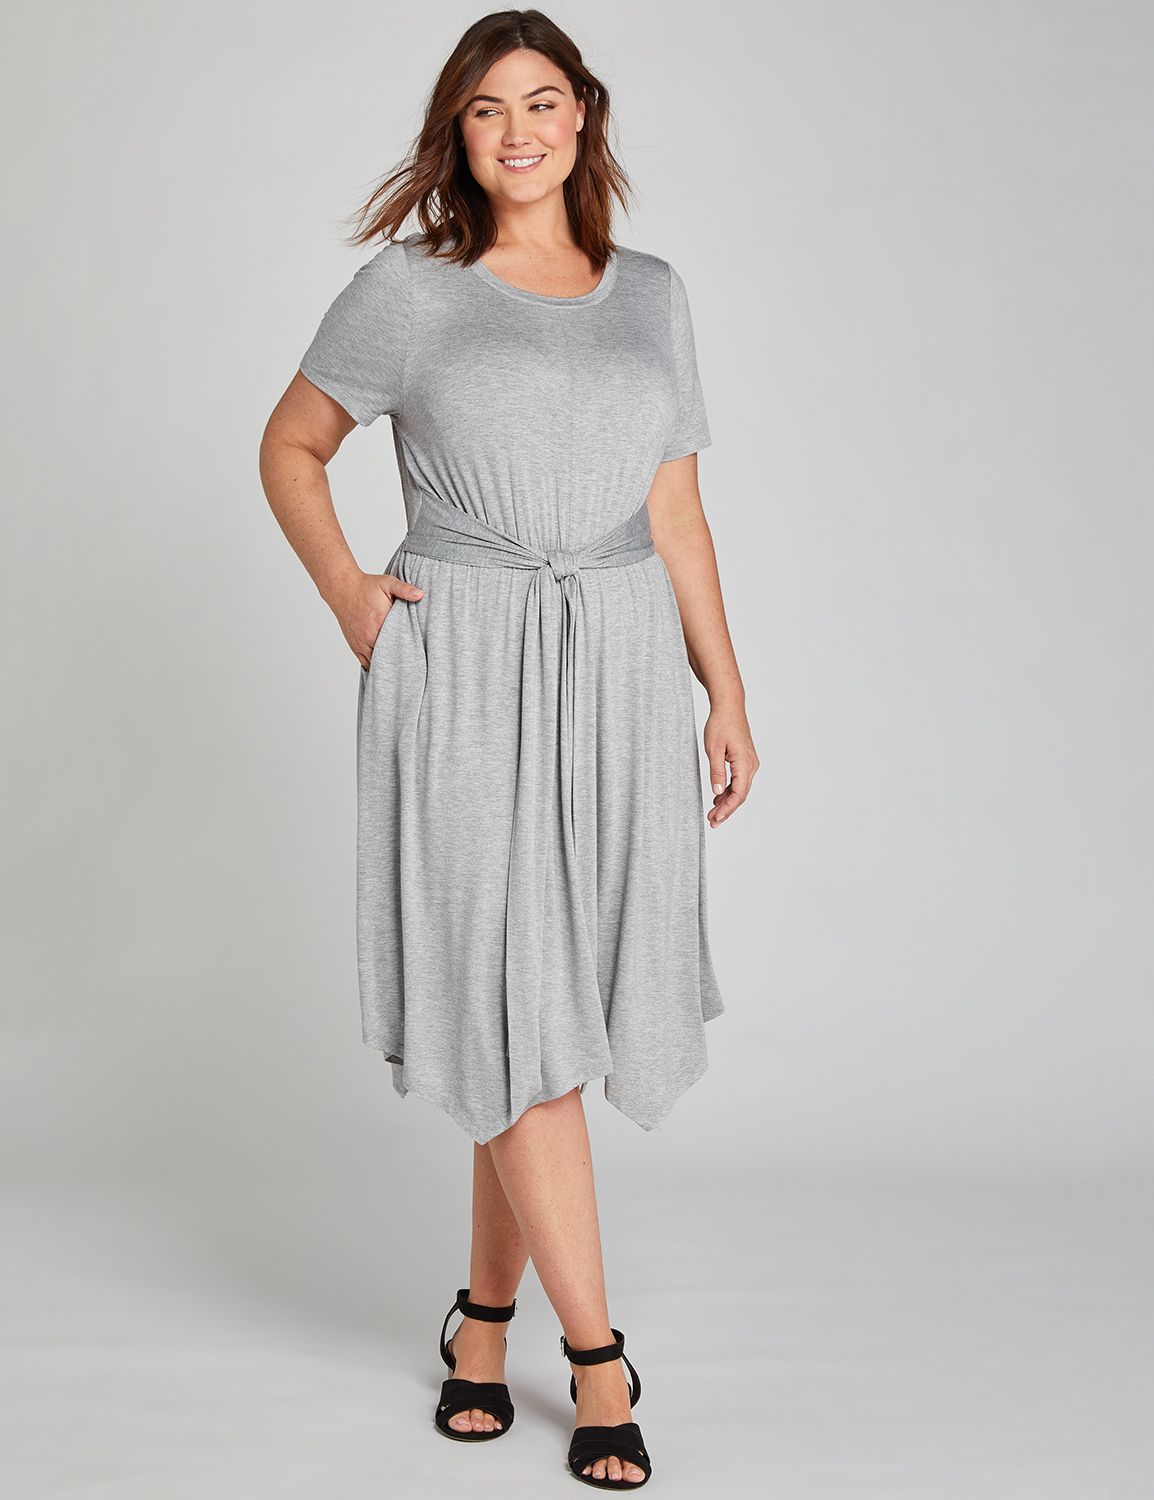 gray dress with sleeves